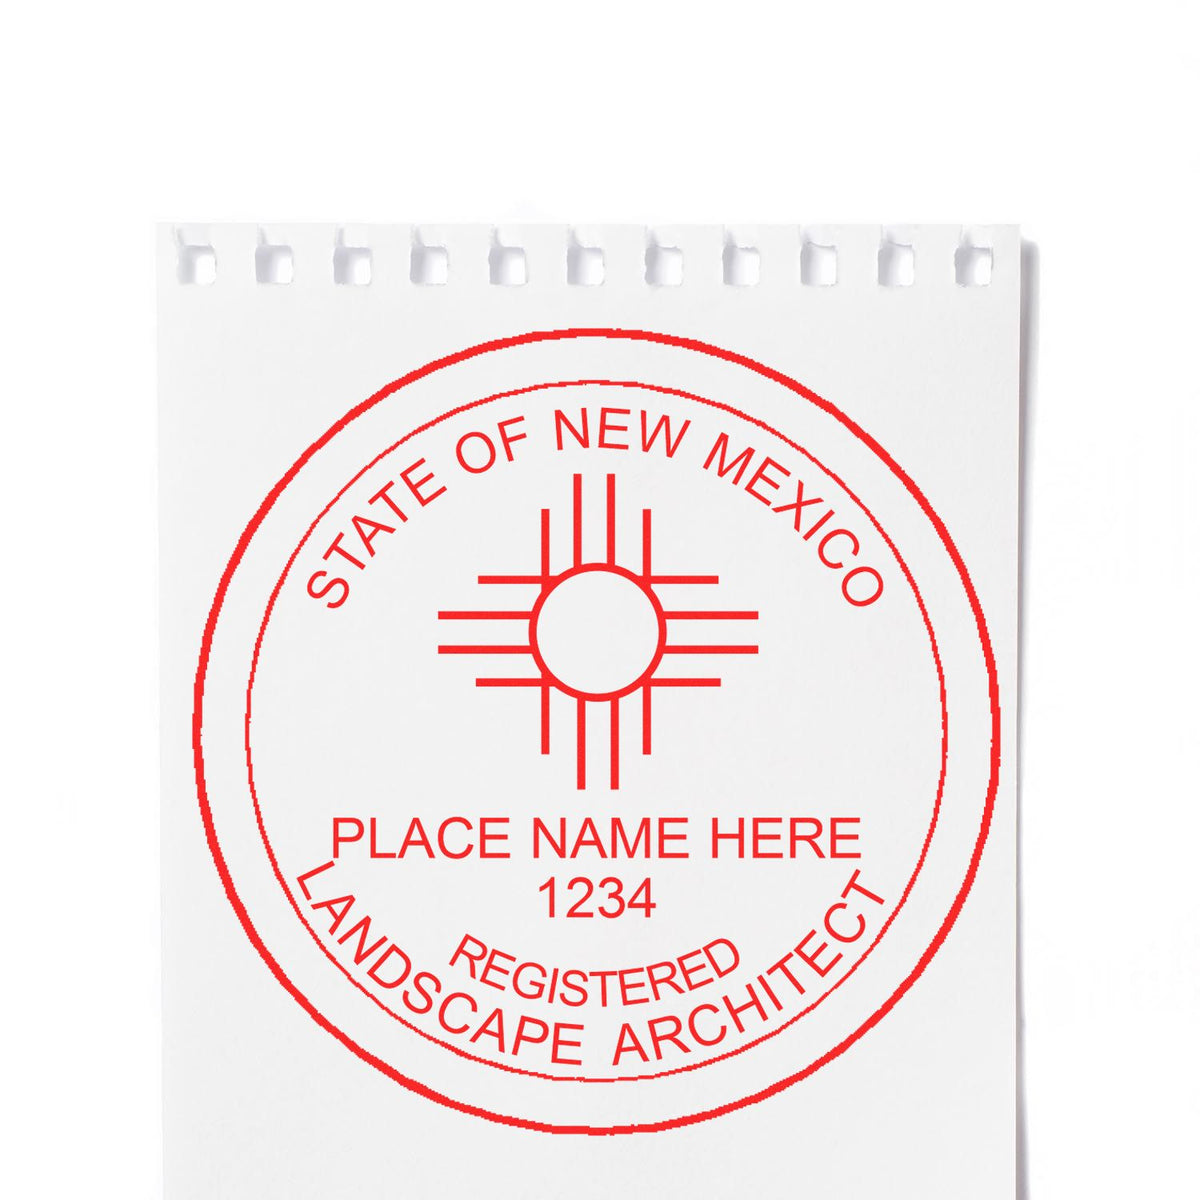 A stamped impression of the Slim Pre-Inked New Mexico Landscape Architect Seal Stamp in this stylish lifestyle photo, setting the tone for a unique and personalized product.